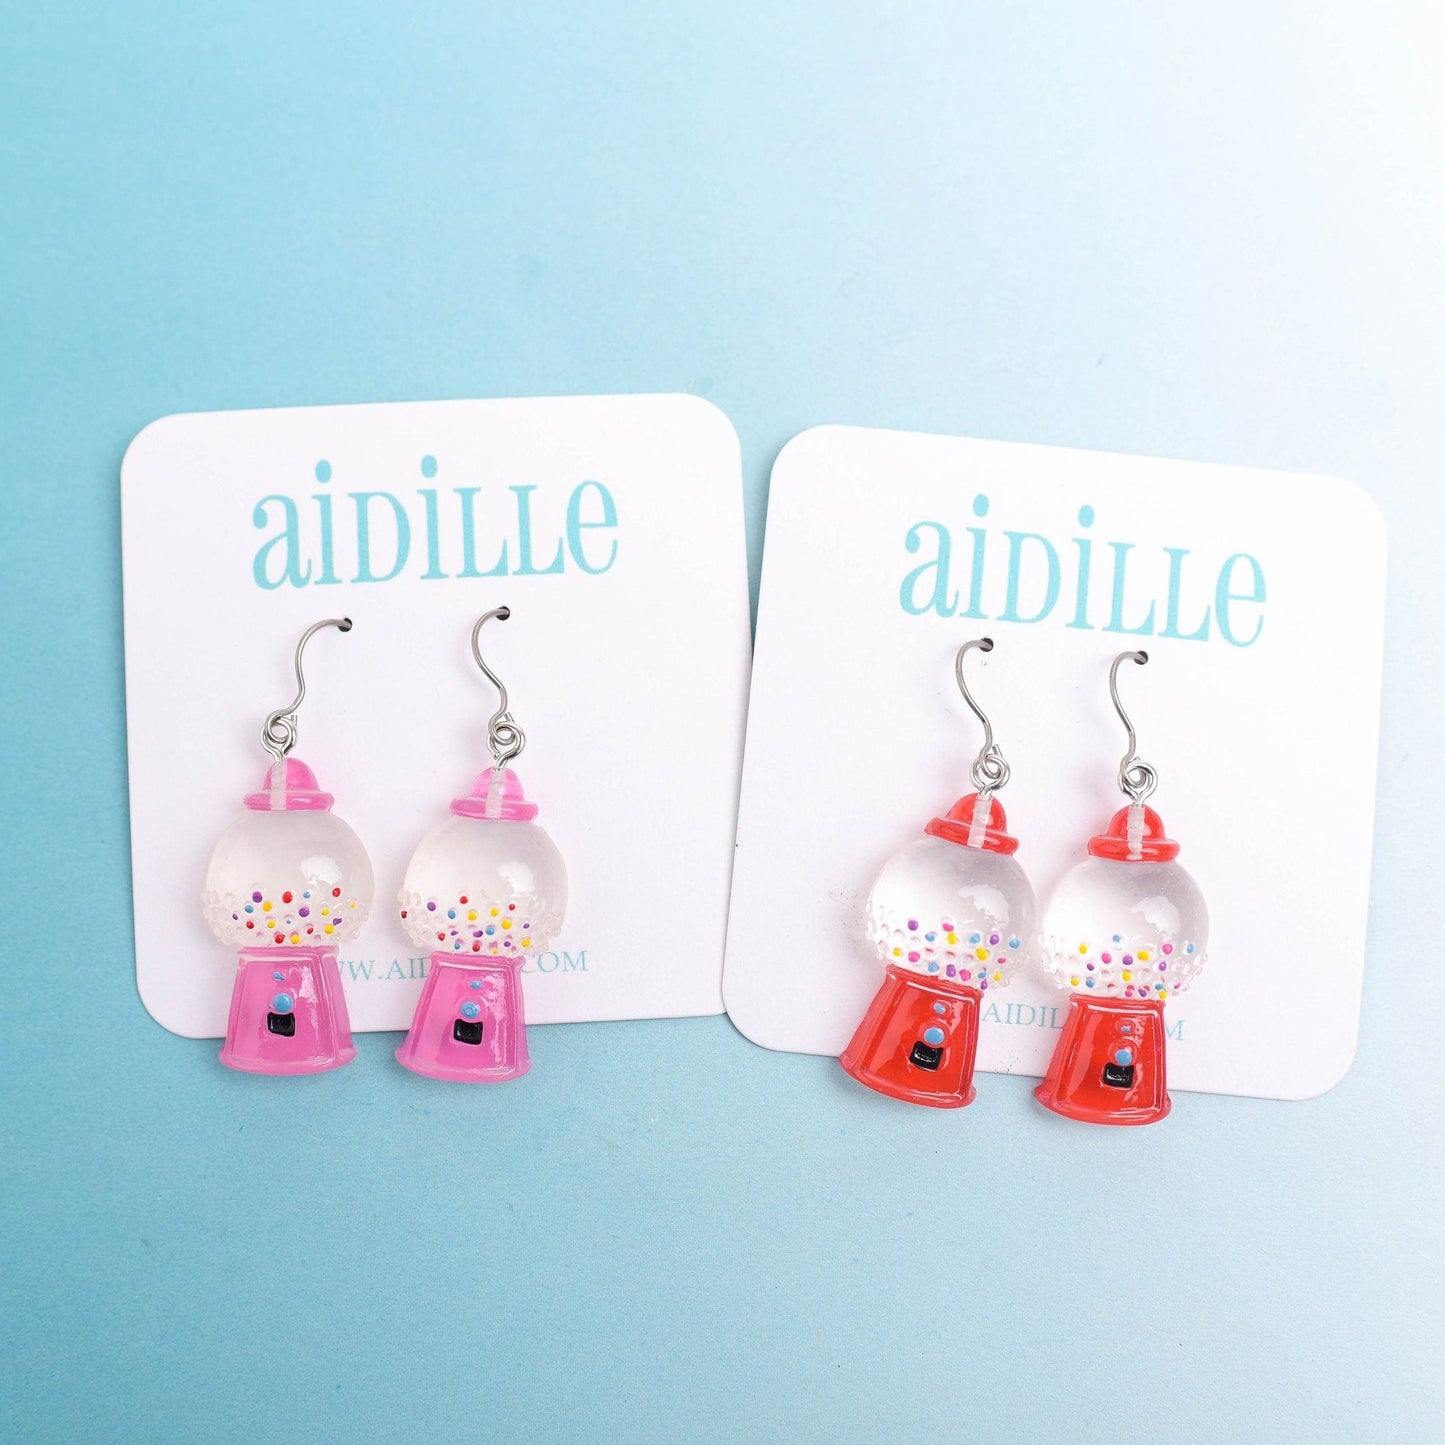 Gumball Machine Earrings with Titanium Ear Wires- Choose Red or Pink